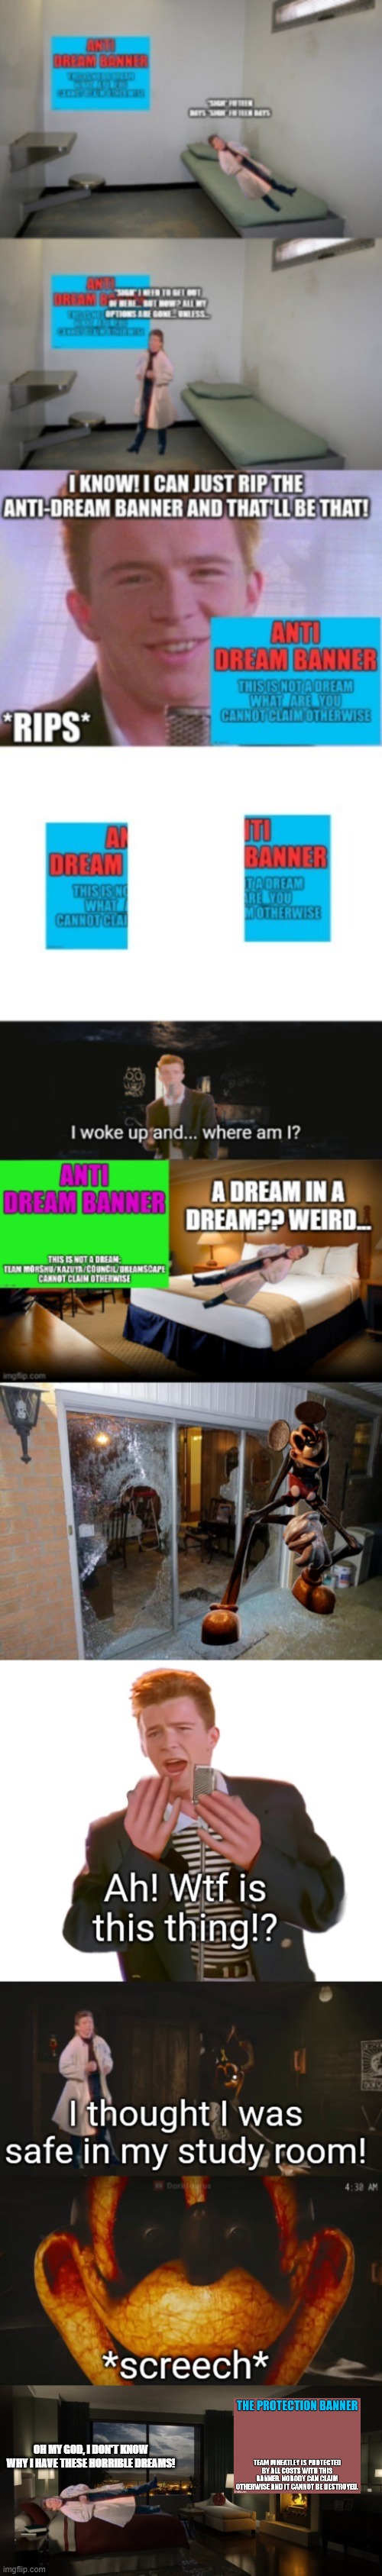 You forgot an anti dream banner when he was confronting Rick. Btw I don't wanna hear the council's opinion on the banner. | OH MY GOD, I DON'T KNOW WHY I HAVE THESE HORRIBLE DREAMS! | image tagged in night bedroom | made w/ Imgflip meme maker